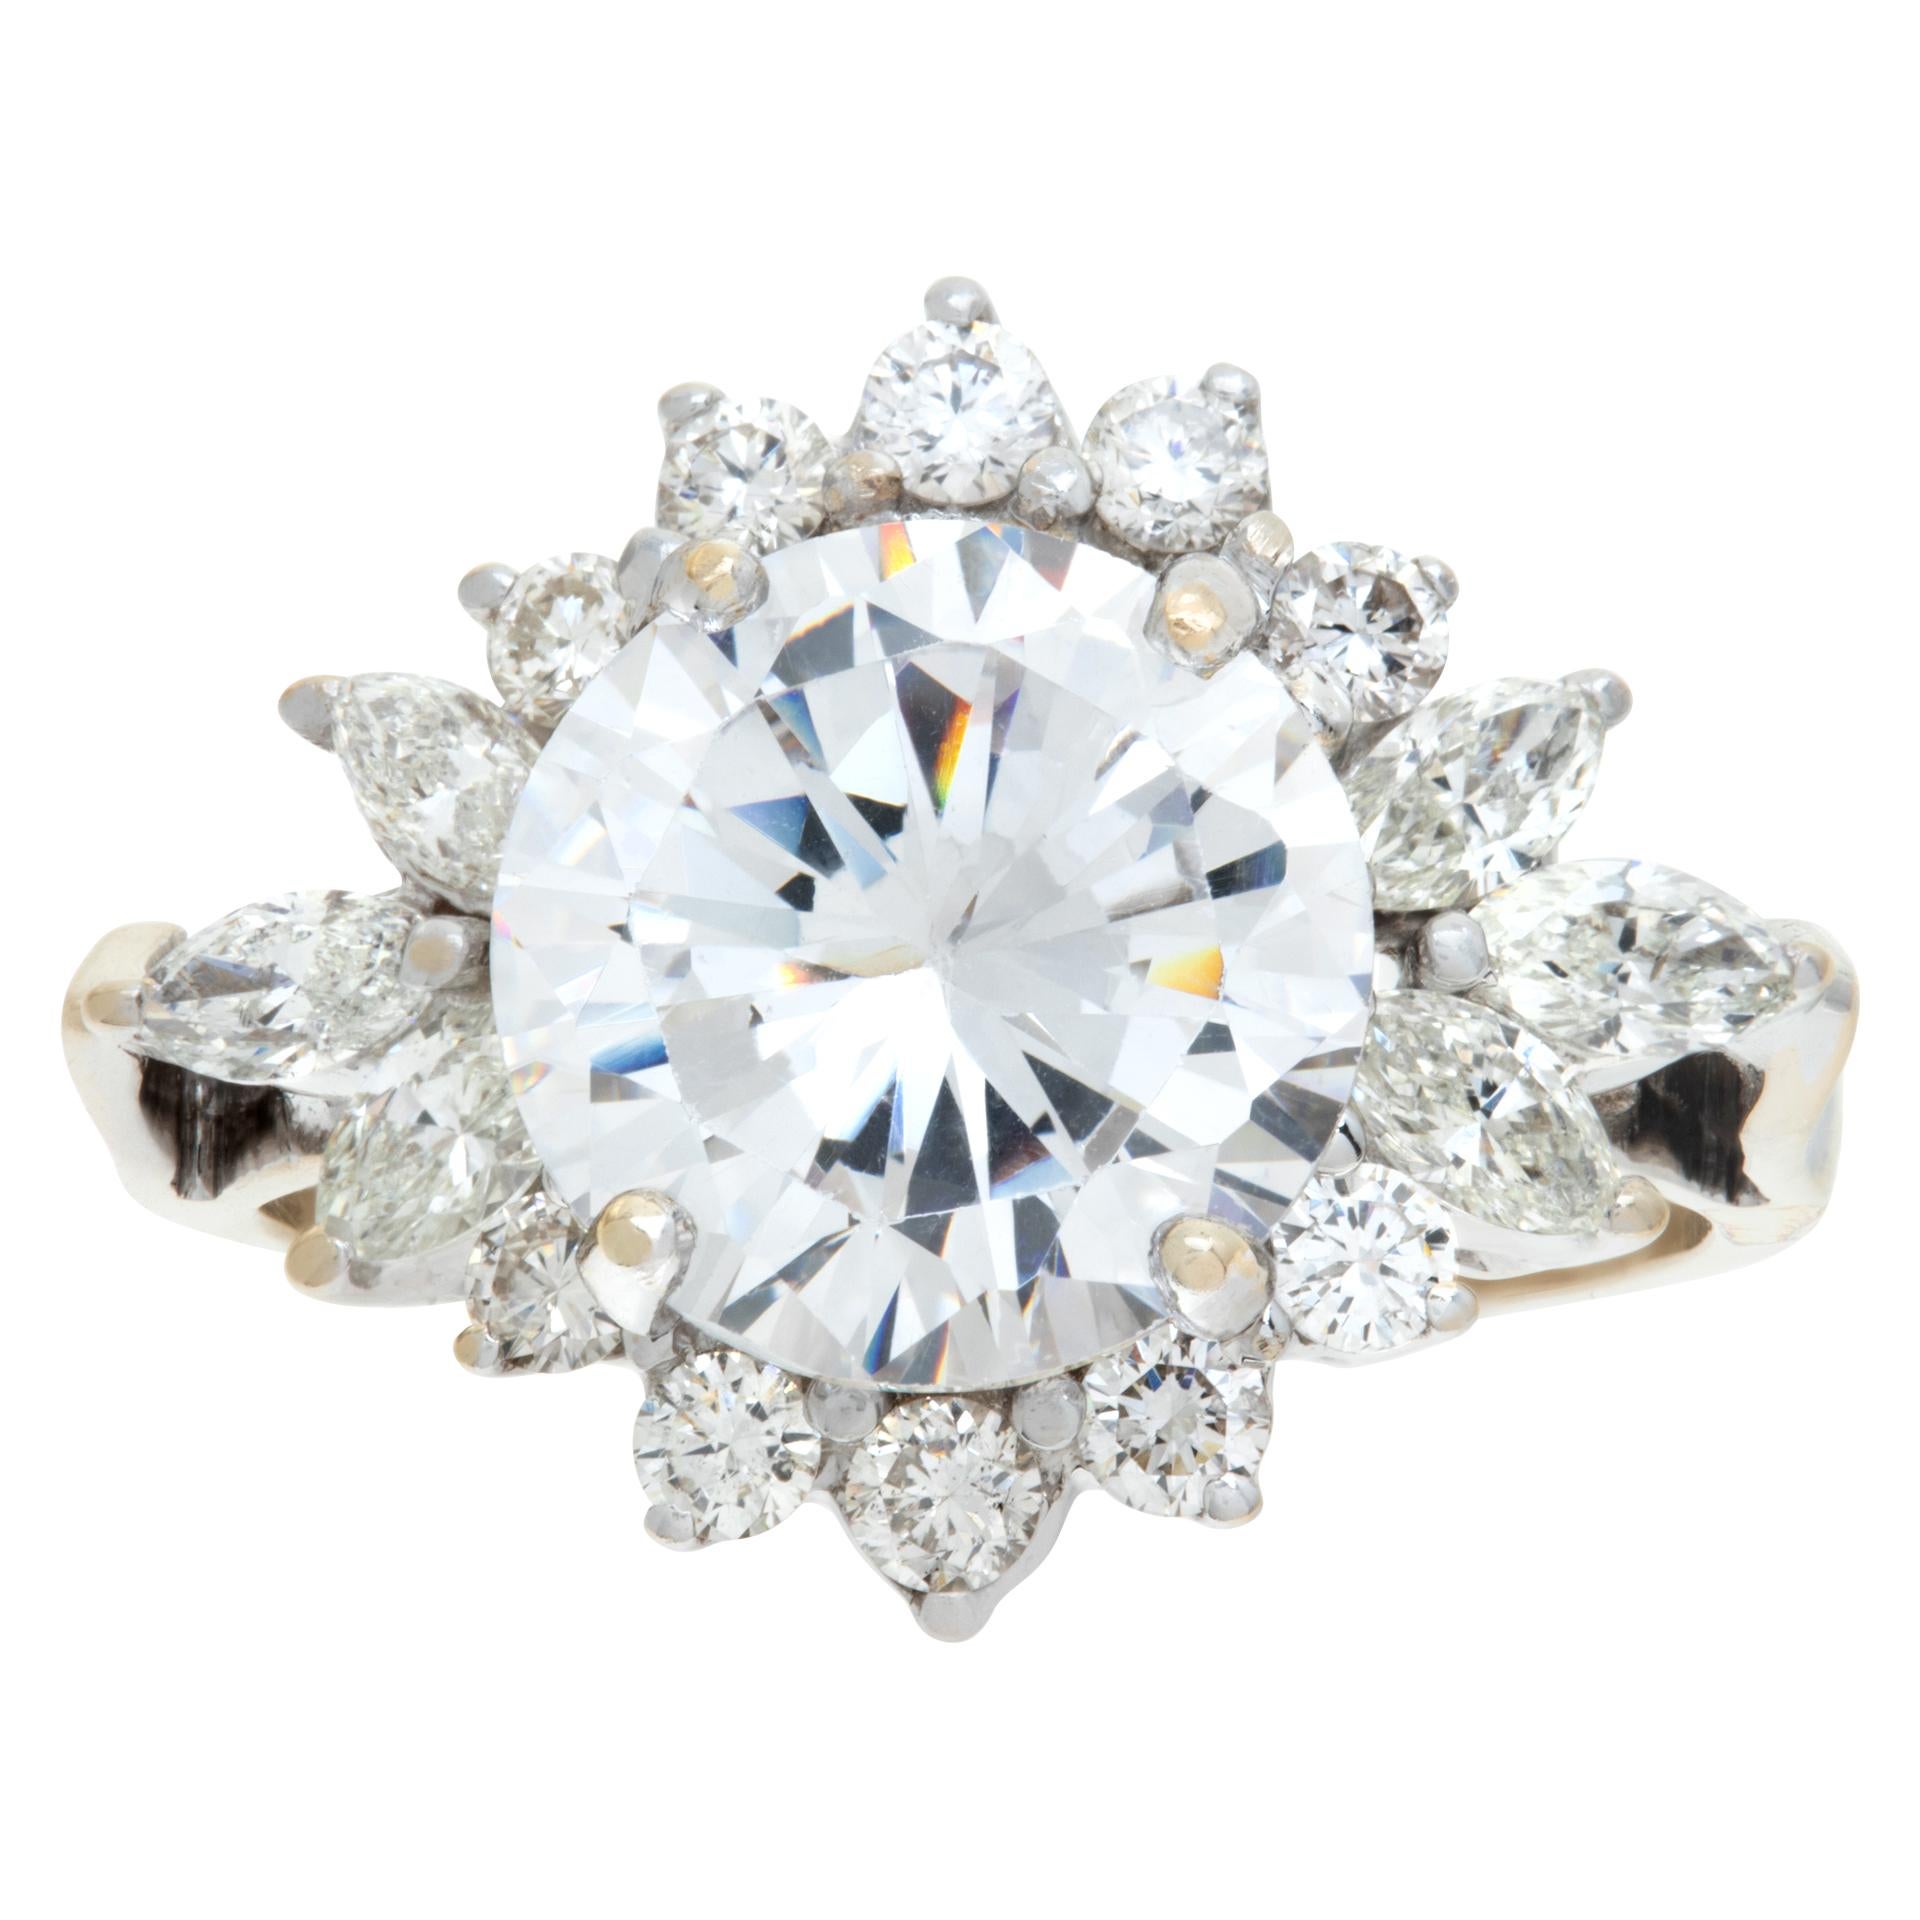 GIA certified round brilliant cut diamond 3.04 carat ( D color, SI2 clarity) ring mounted in an 18k white and yellow gold setting with approximately 0.75 carats in round and marquise diamonds. Size 6.5.This GIA certified ring is currently size 6.5